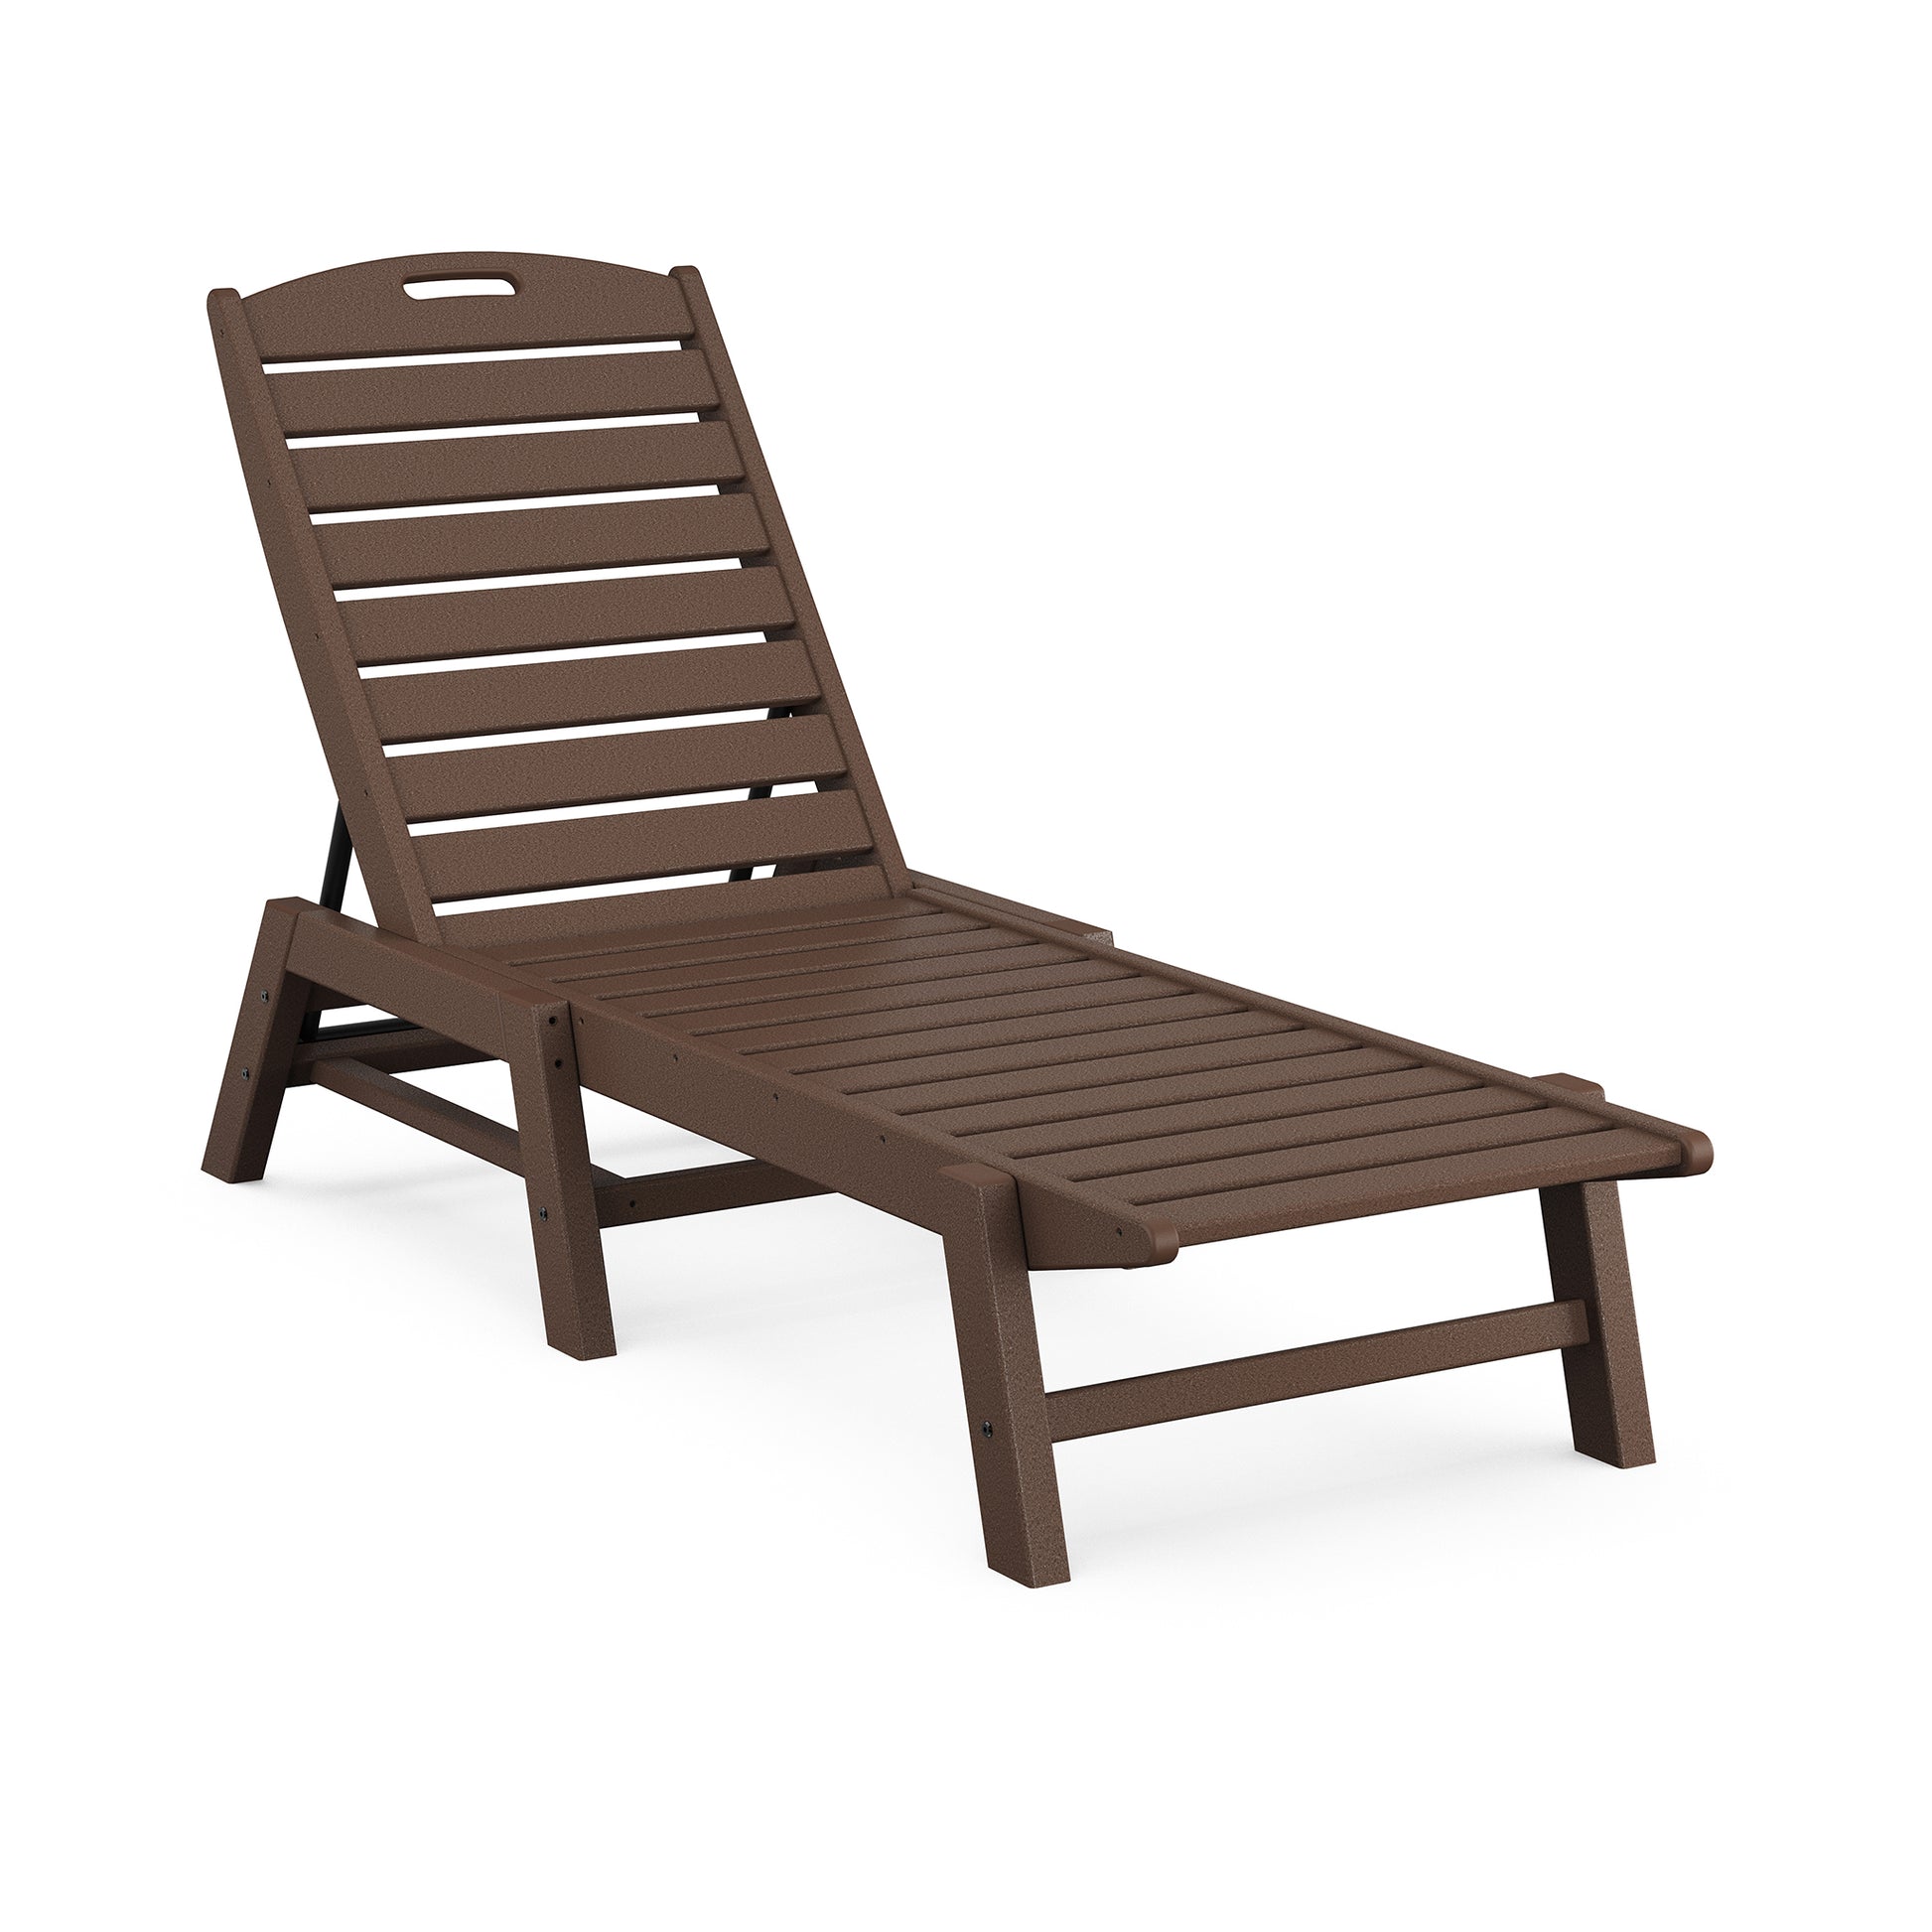 A brown POLYWOOD Nautical Armless Chaise Lounge isolated on a white background, featuring a slatted design and a cut-out handle at the top for easy handling.